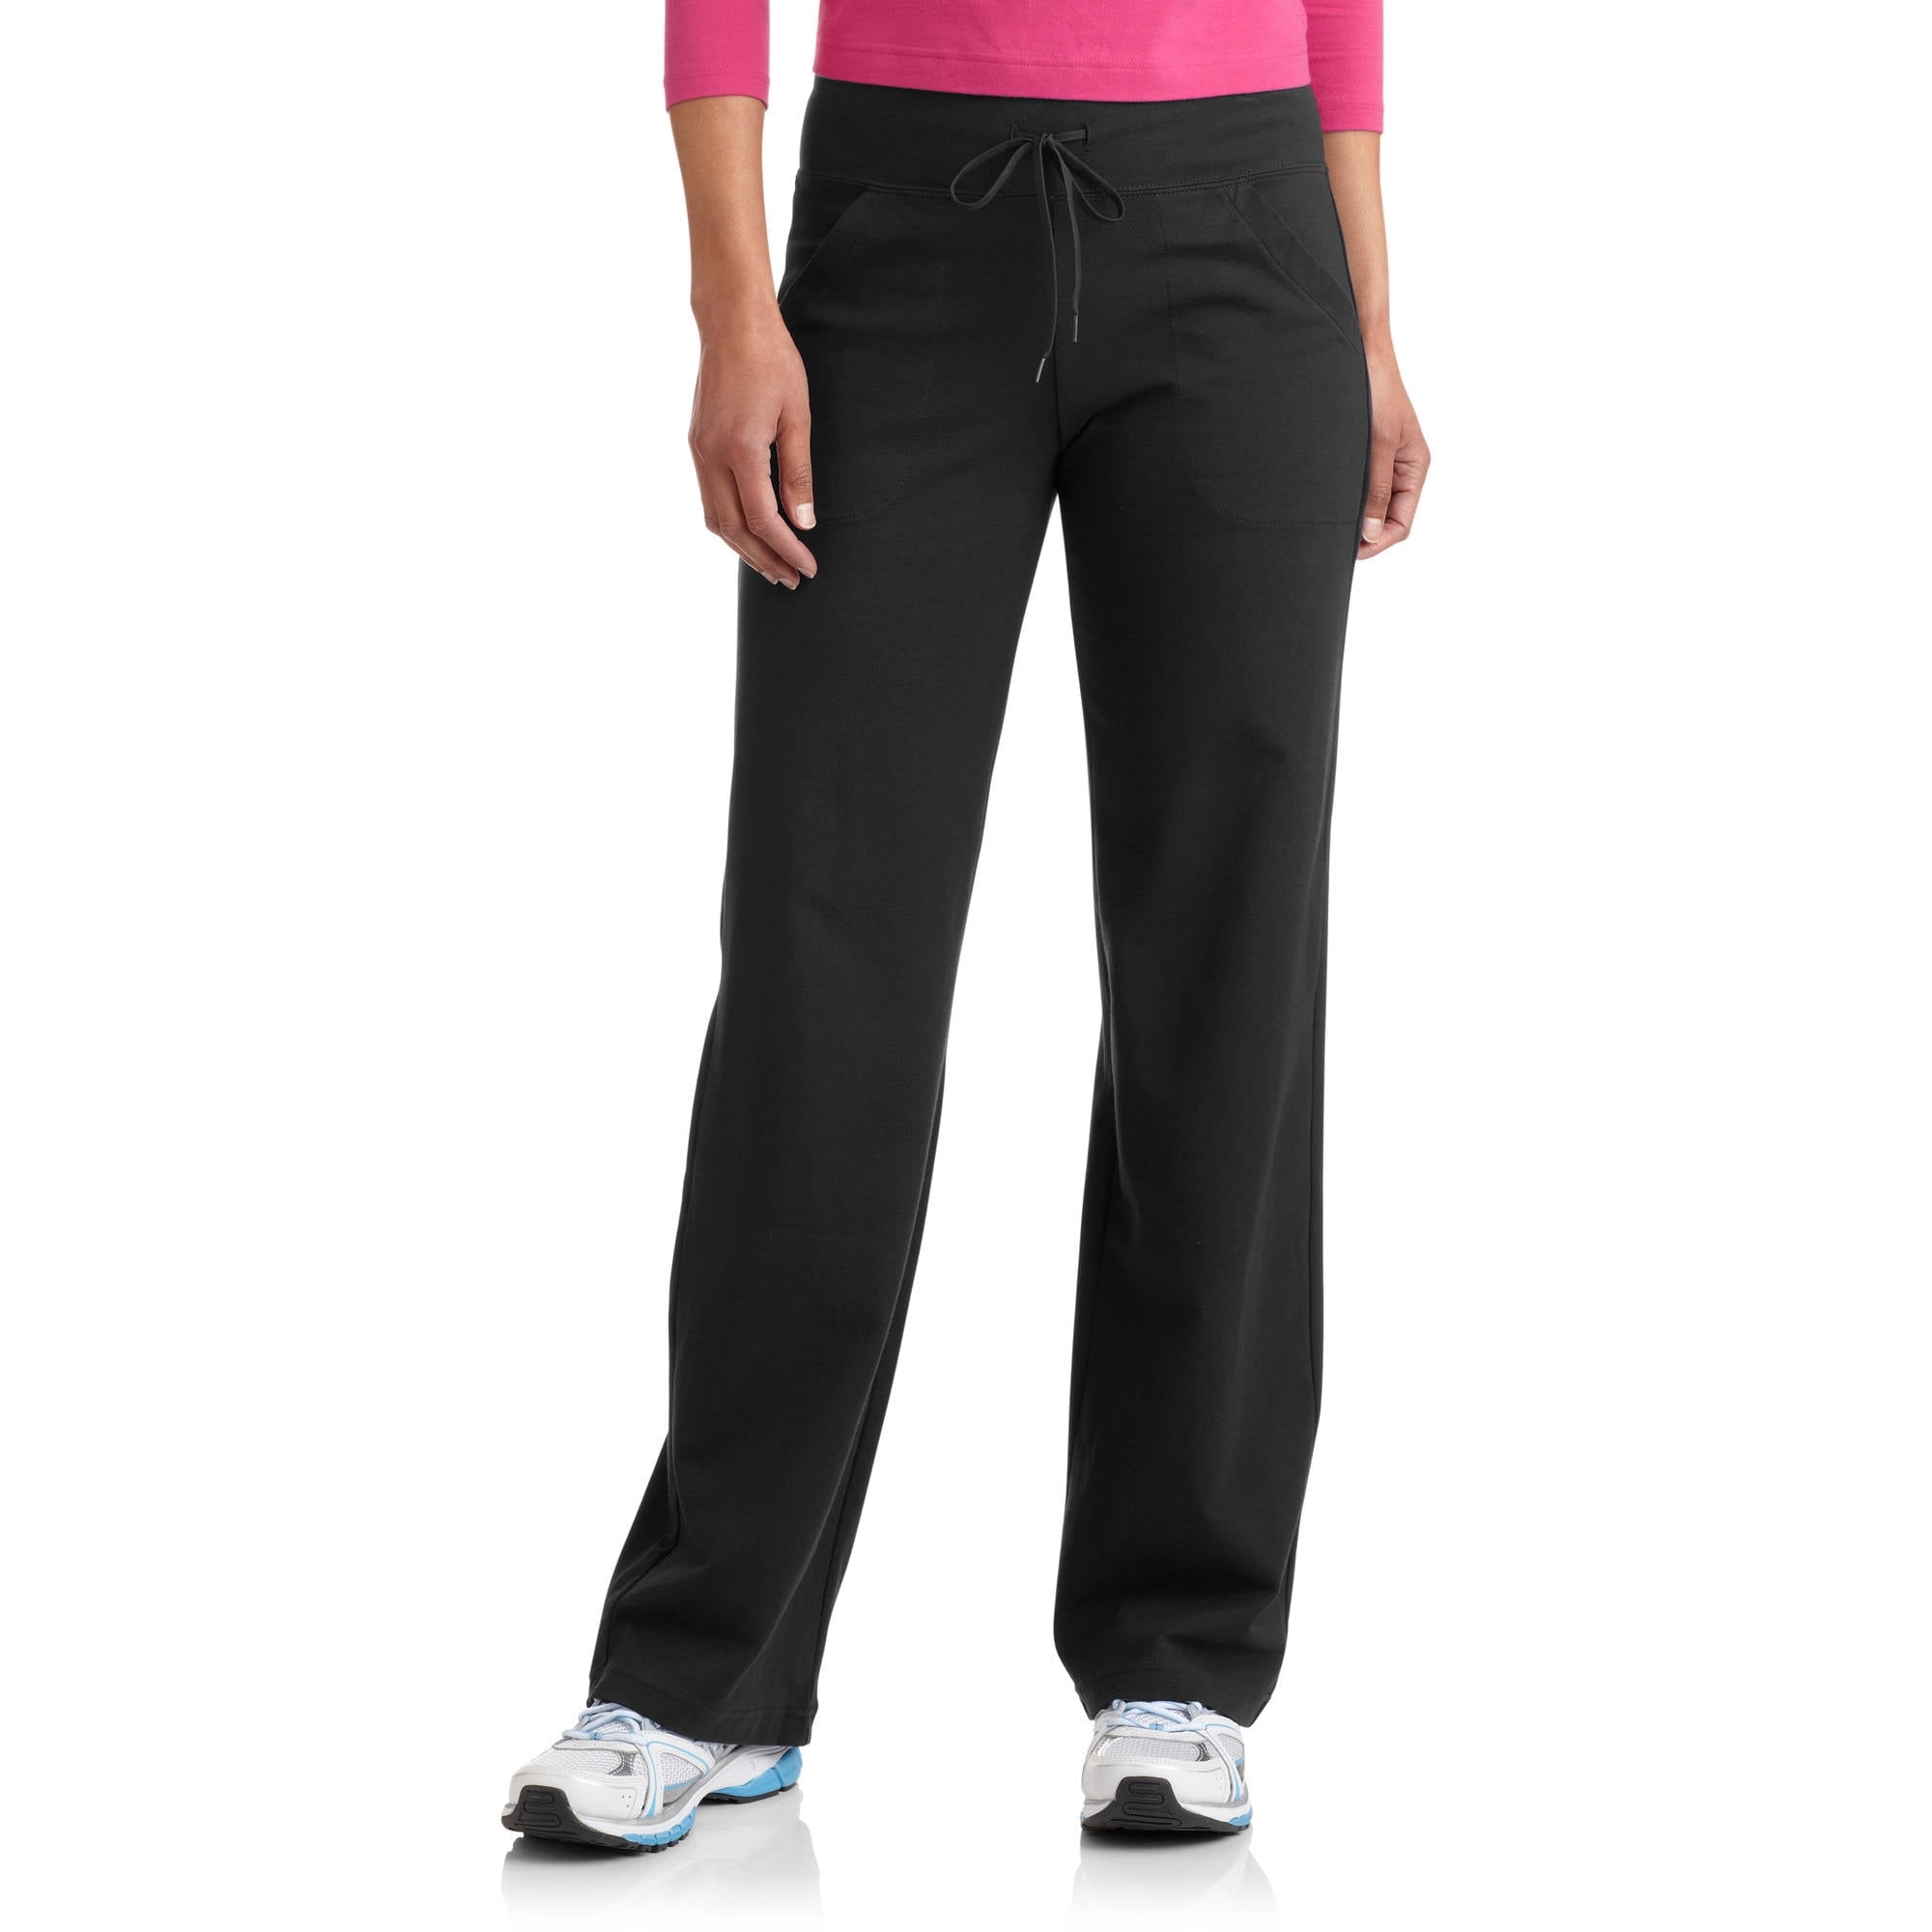 Breathable Yoga LL Womens Running Pants Women Quick Dry, Slim Fit, Loose Fit  With Nine Point Pockets For Running, Training, And Fitness From Lu1994,  $13.09